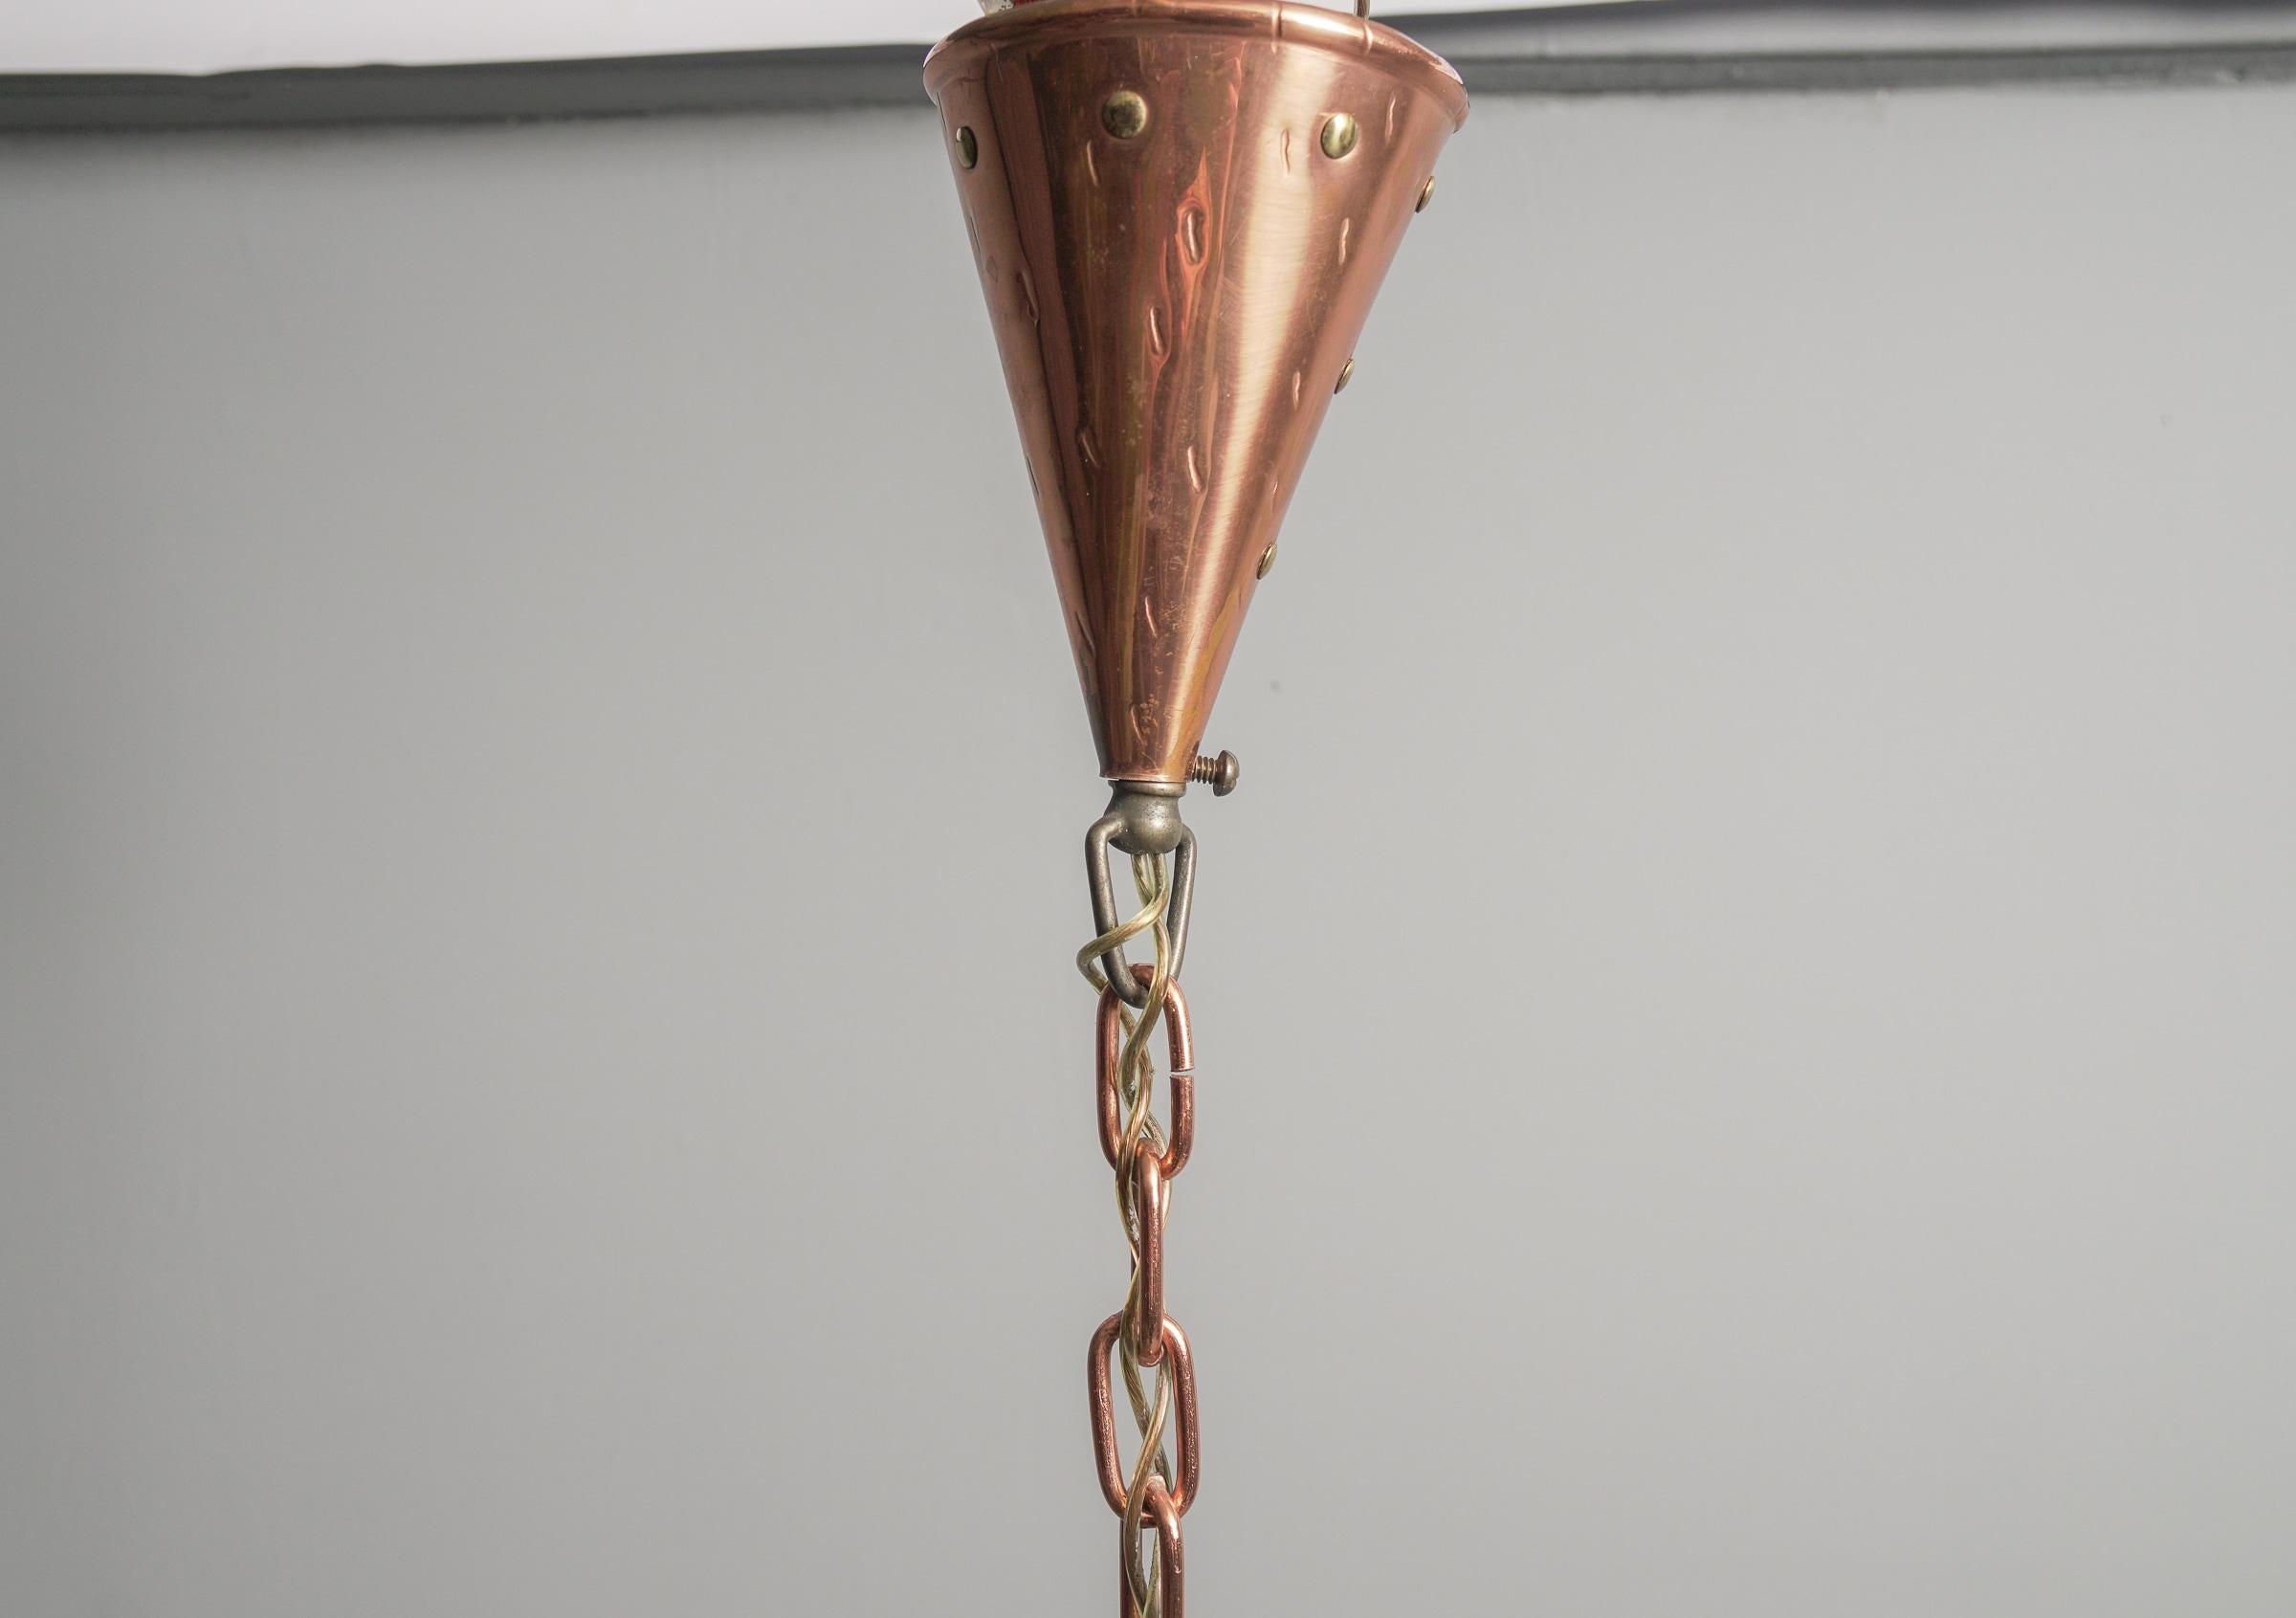 Hammered Copper Cone Pendant Lamps by E.S Horn Aalestrup, 1950s Denmark For Sale 7